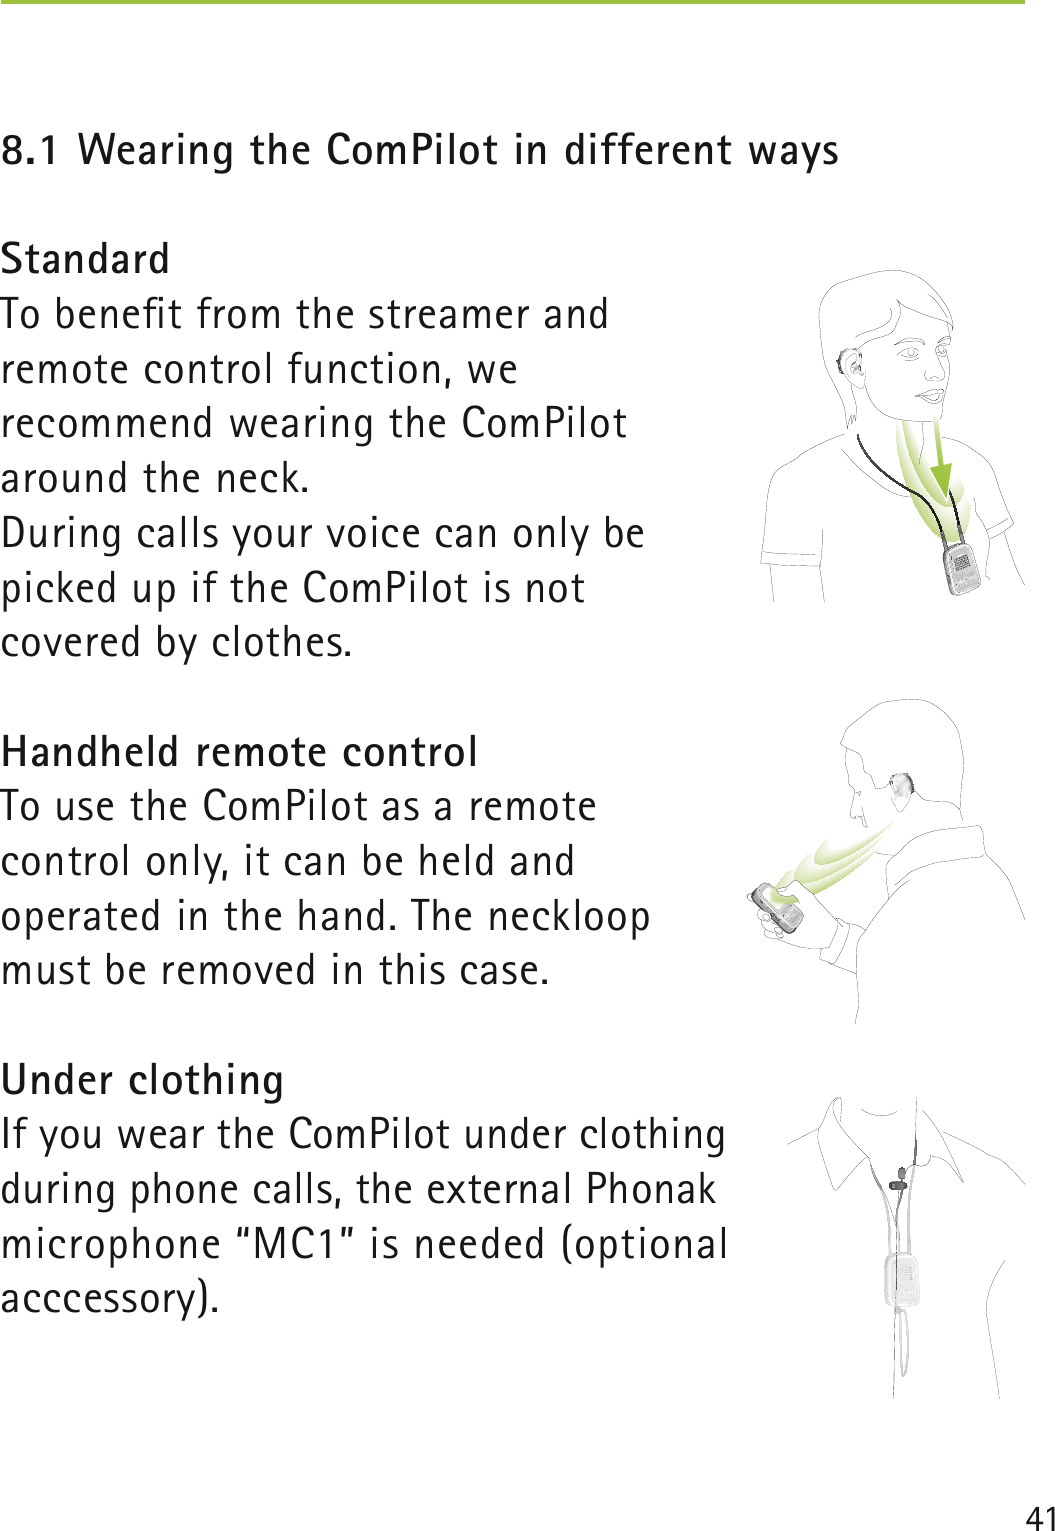 418.1 Wearing the ComPilot in different waysStandardTo beneﬁt from the streamer and remote control function, we recommend wearing the ComPilot around the neck.During calls your voice can only be picked up if the ComPilot is not covered by clothes. Handheld remote controlTo use the ComPilot as a remote control only, it can be held and operated in the hand. The neckloop must be removed in this case.Under clothingIf you wear the ComPilot under clothing during phone calls, the external Phonak microphone “MC1” is needed (optional acccessory). poweraudio  